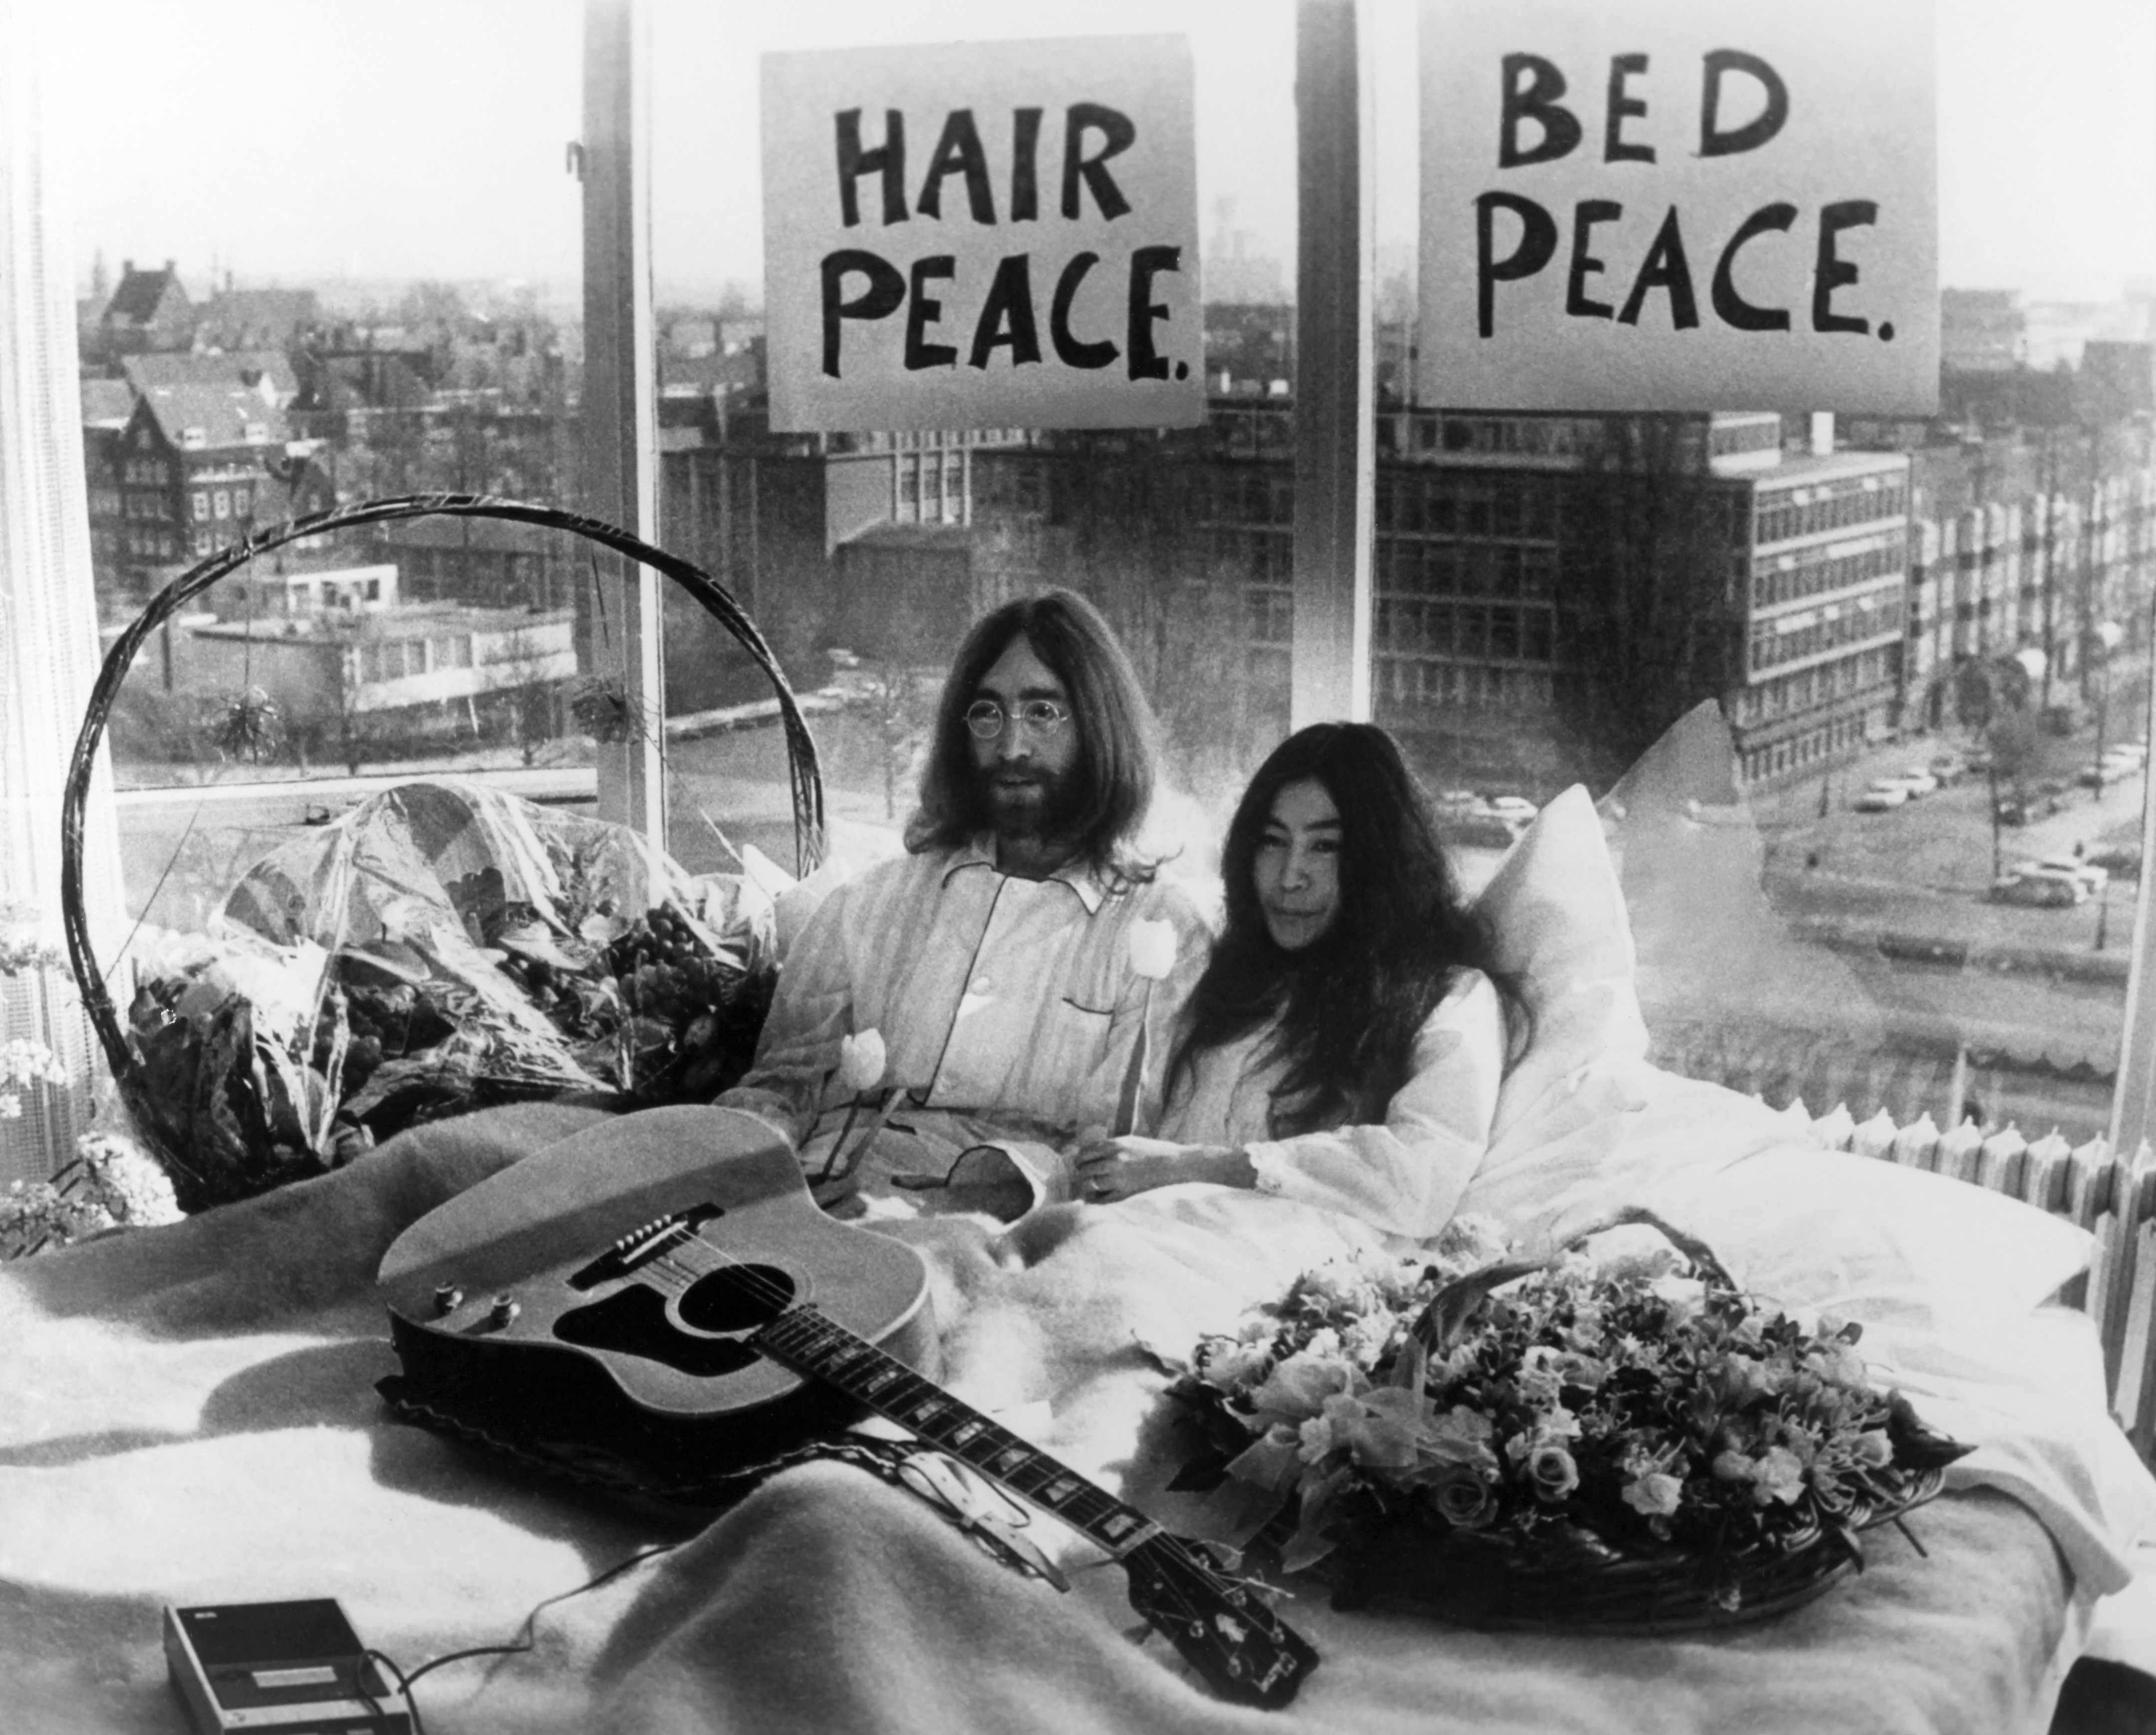 John Lennon and Yoko Ono at their Bed-In